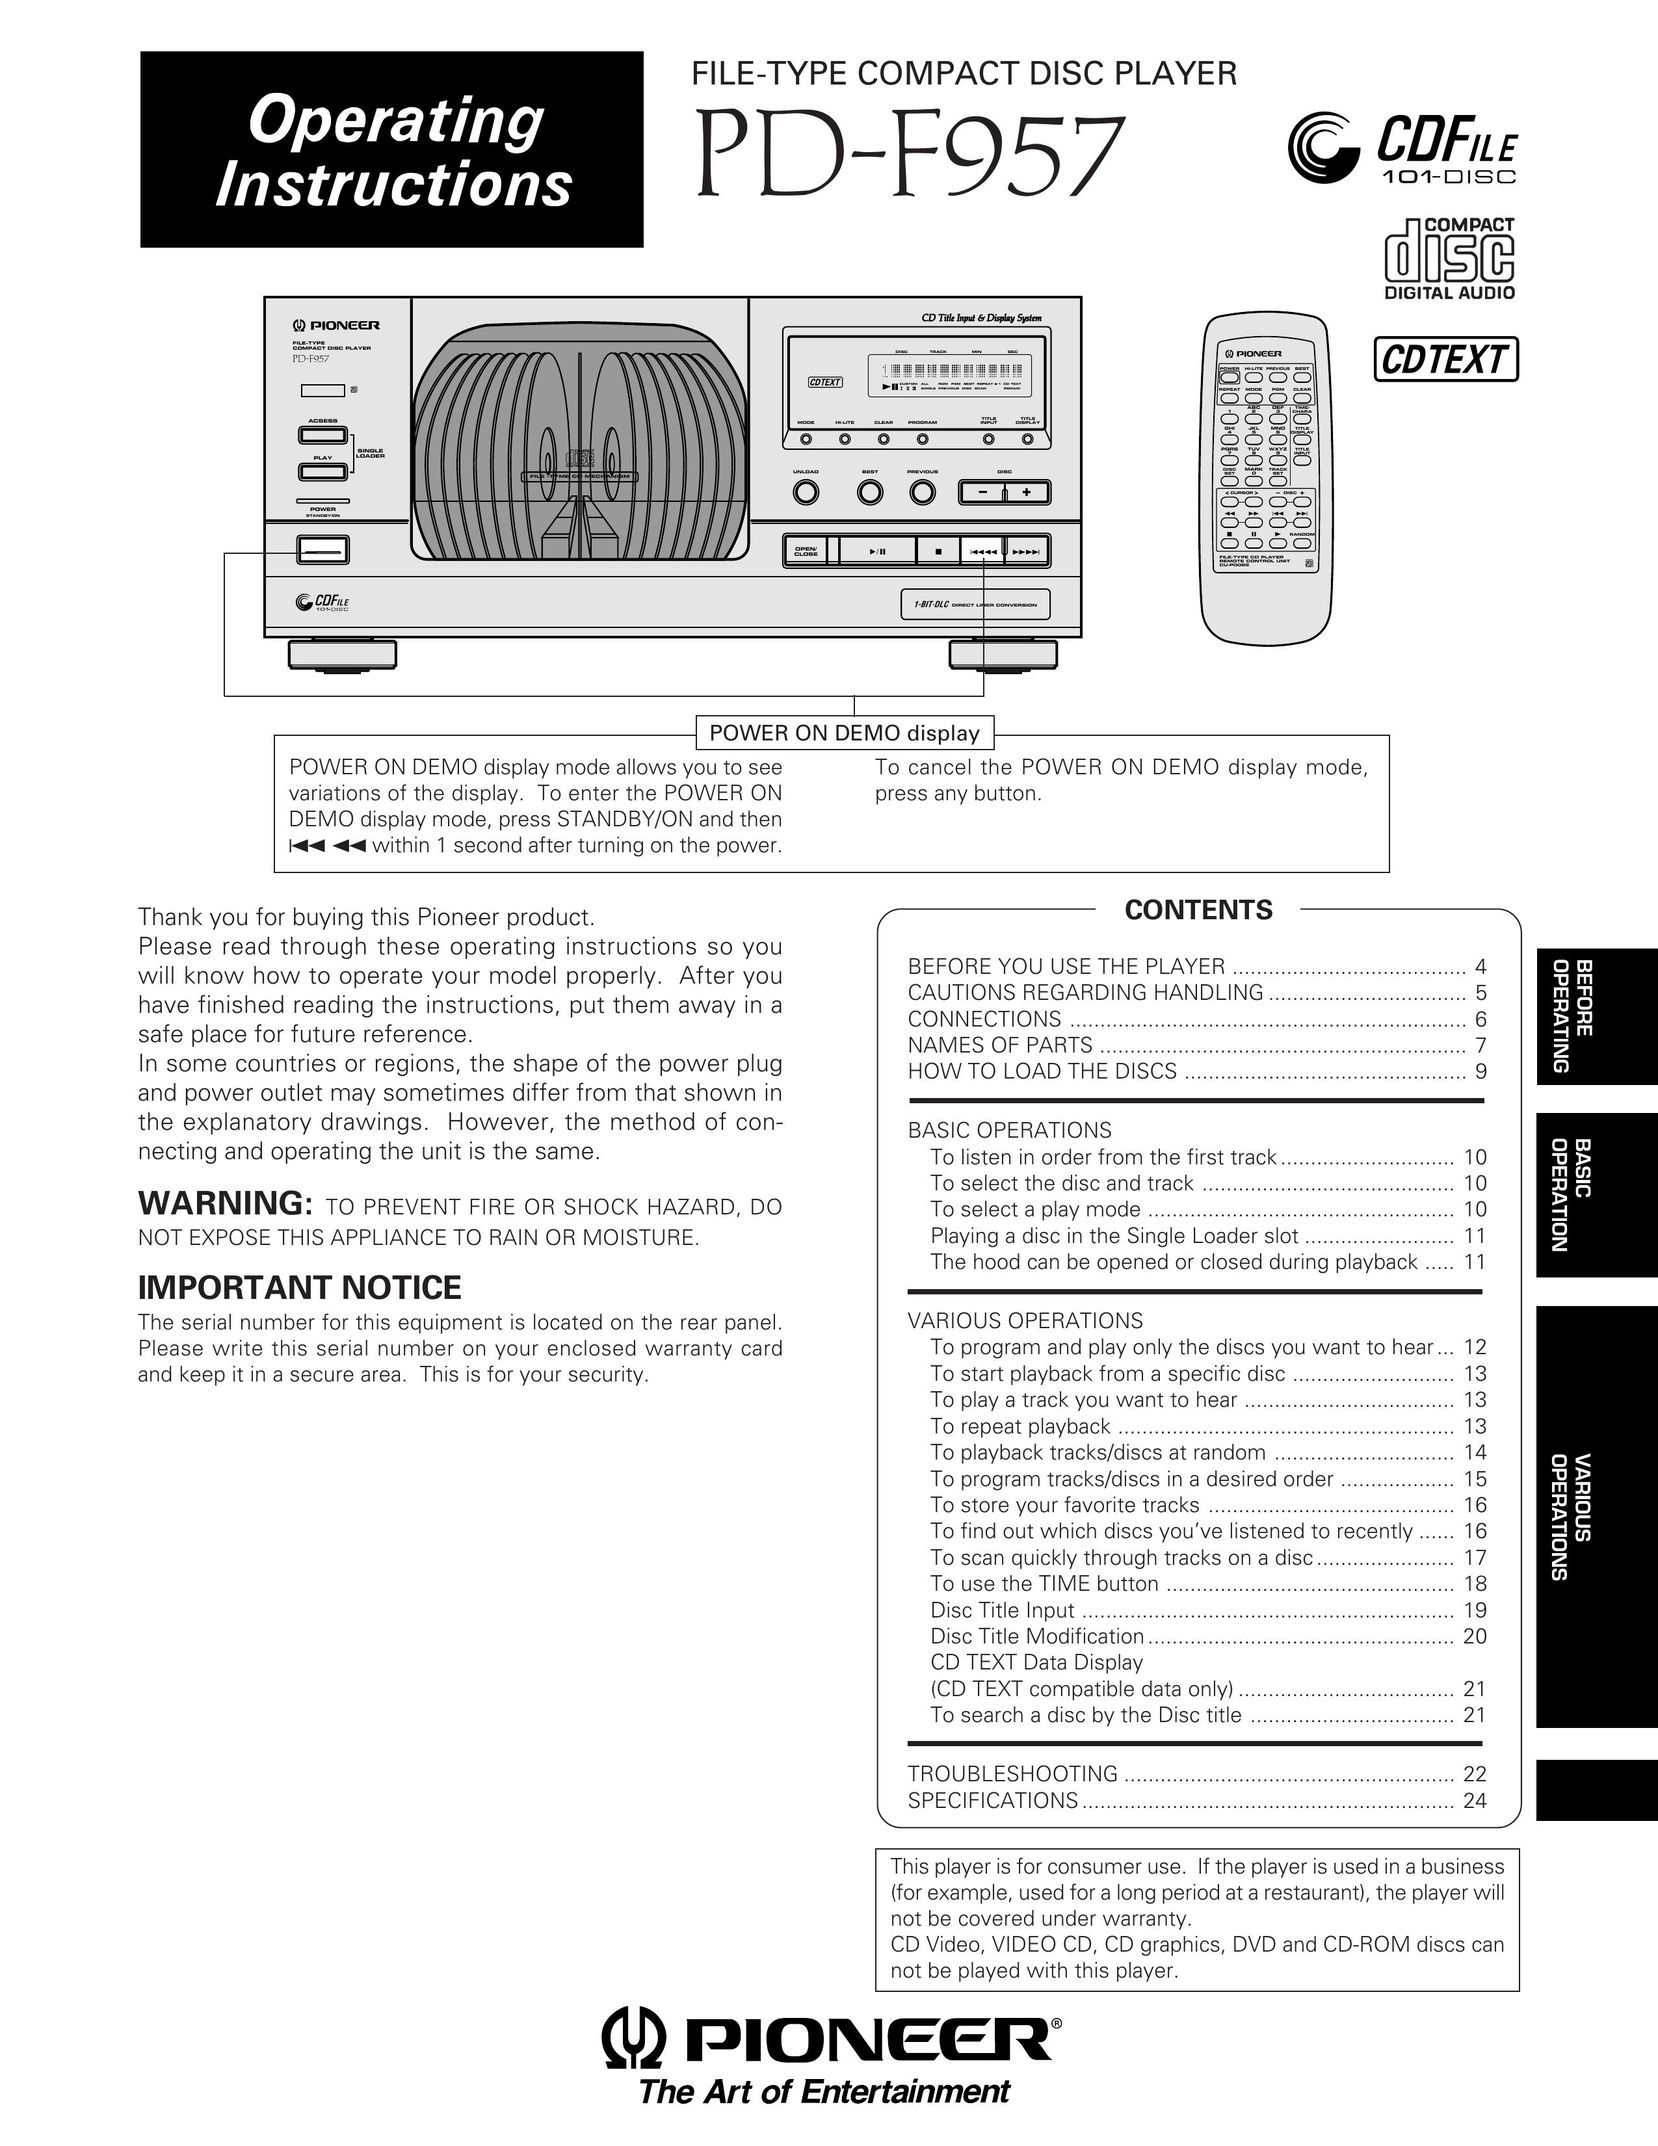 Pioneer PD-F957 Stereo System User Manual